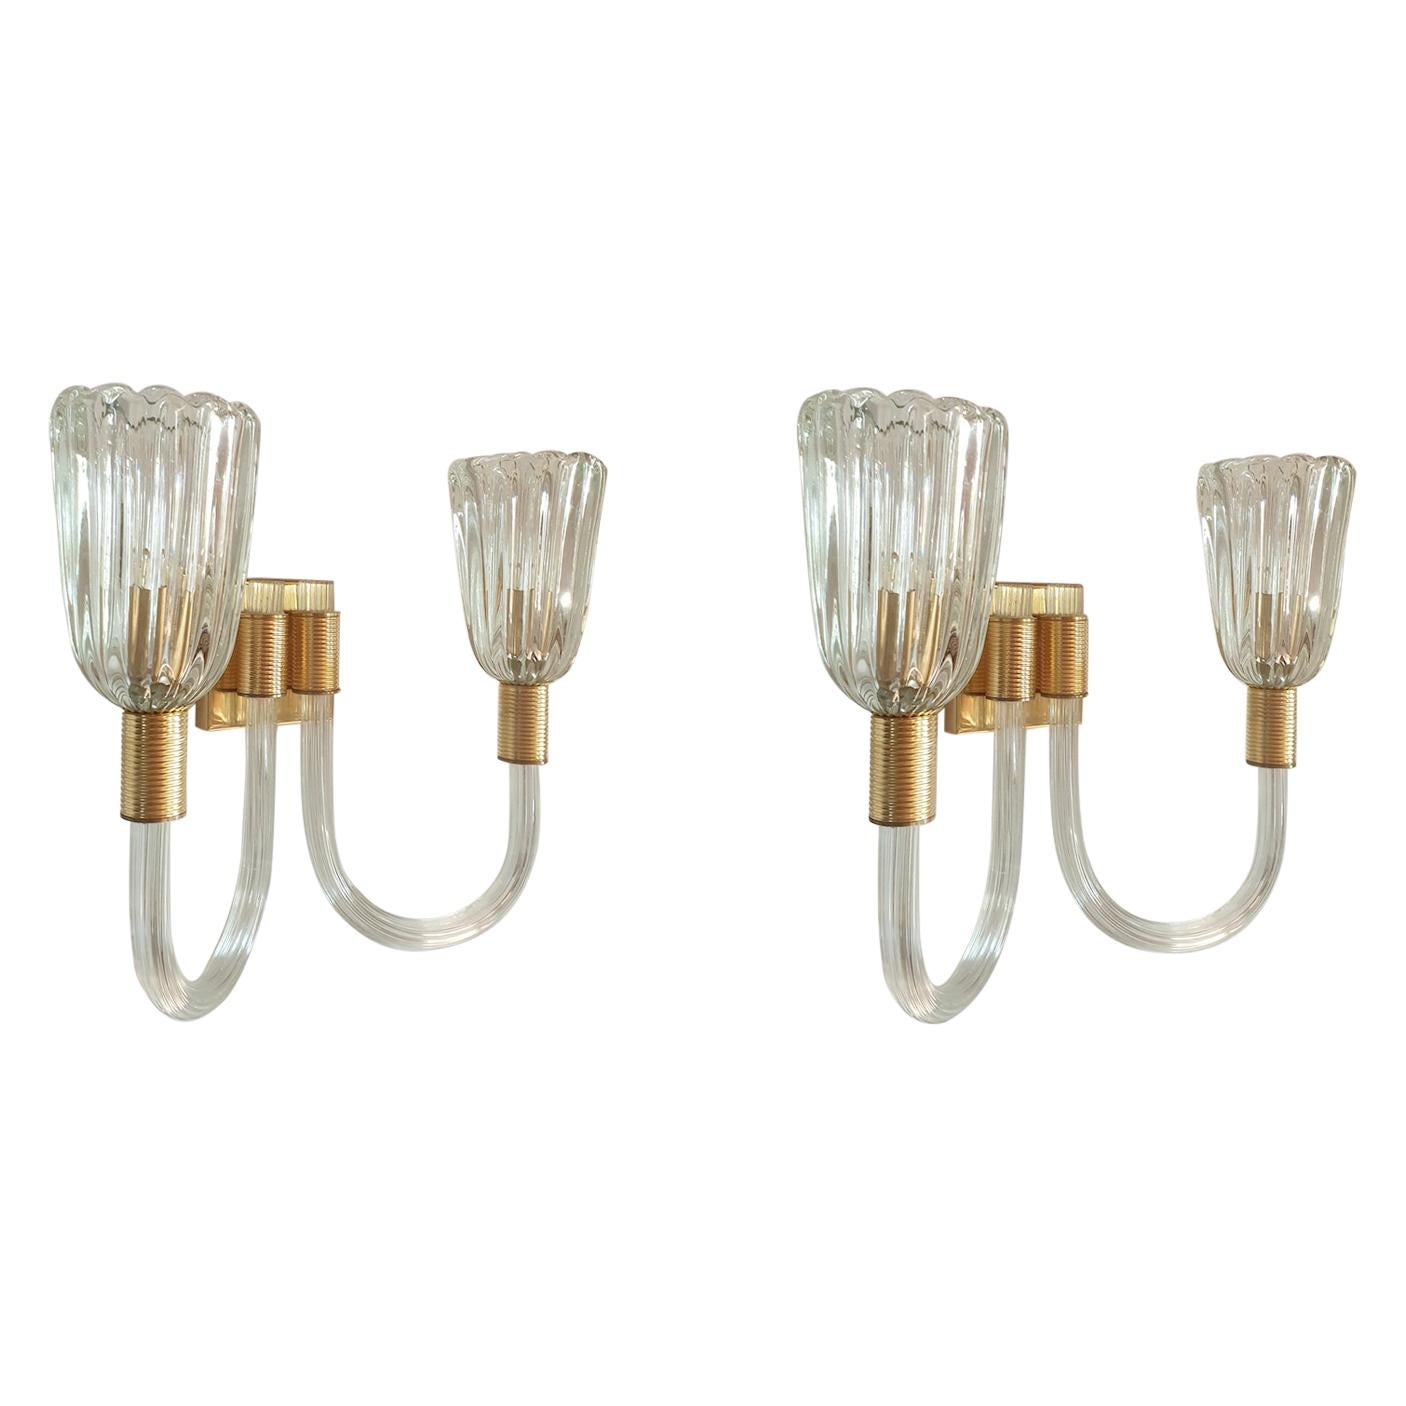 Pair of Mid-Century Modern wall sconces, in hand blown Murano glass, attributed to Barovier & Toso Italy, 1960s.
The vintage sconces are made of clear and thick hand blown Murano glass and polished brass mounts.
They have two lights each and are